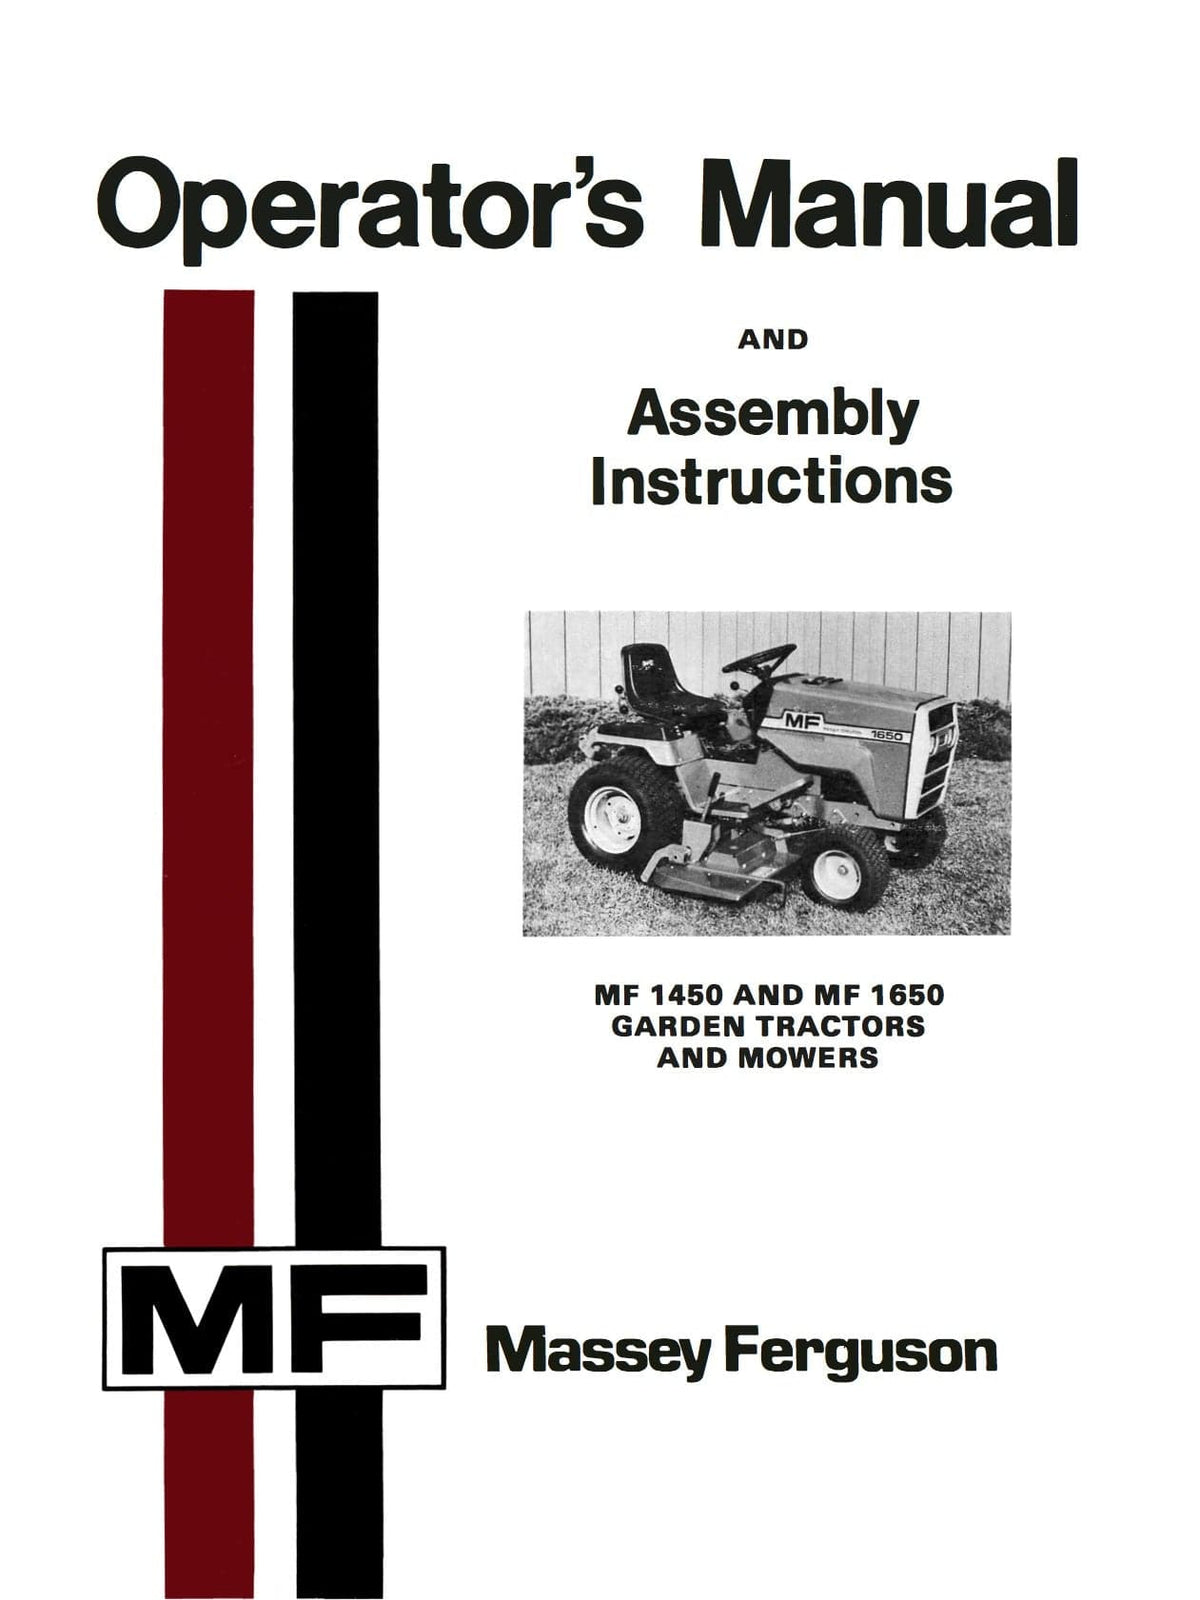 Massey Ferguson MF 1450 and MF 1650 Garden Tractors and Mowers - Operator's Manual - Ag Manuals - A Provider of Digital Farm Manuals - 1